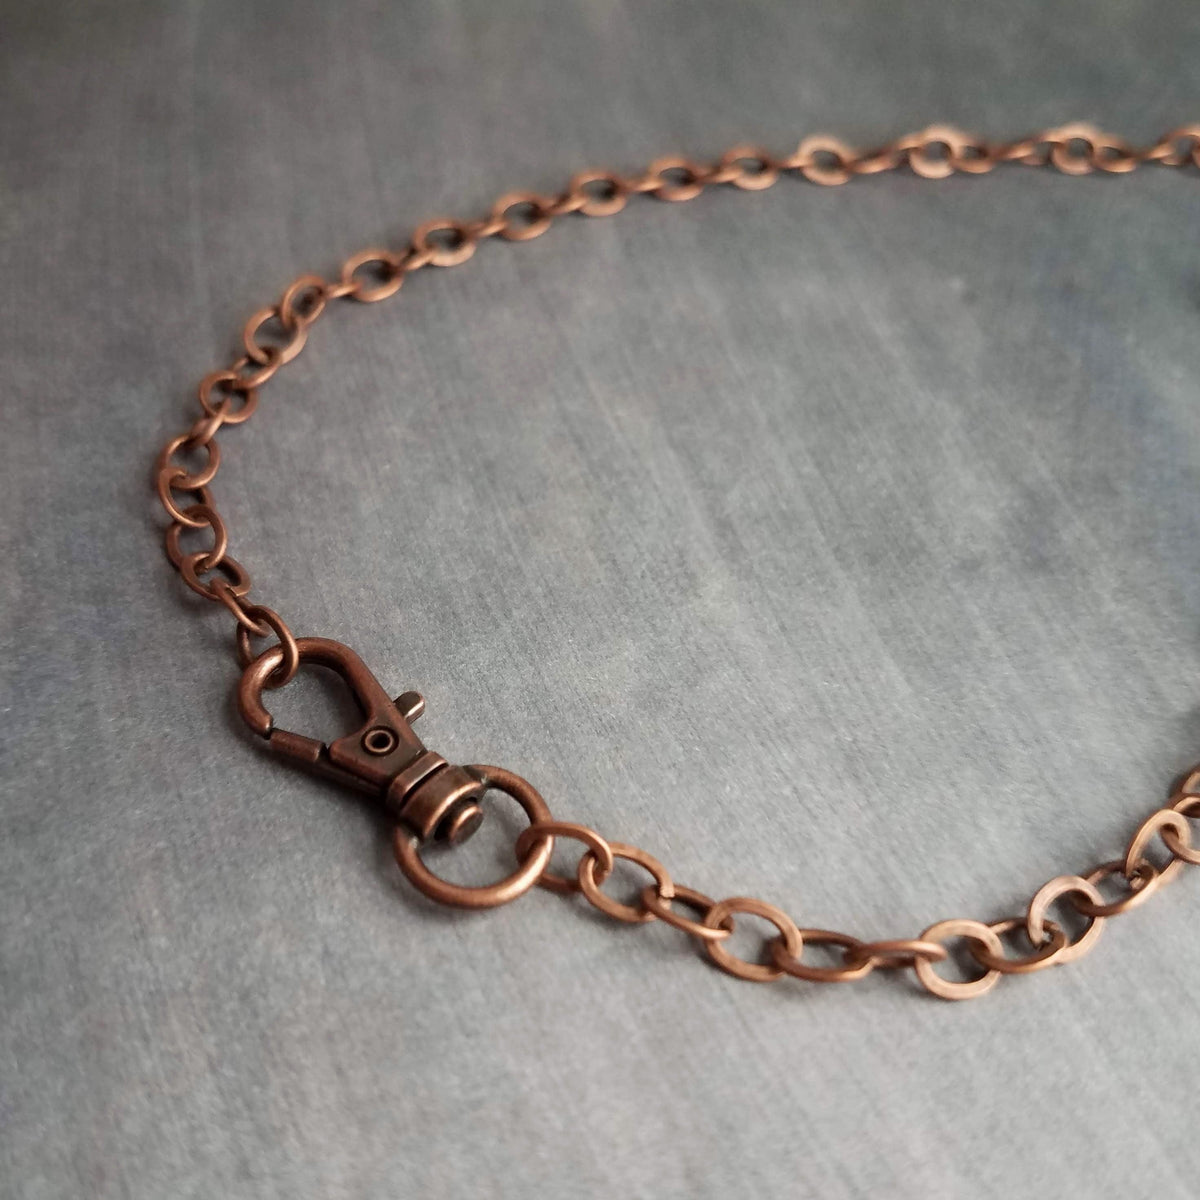 Large Copper Chain Necklace, big clasp necklace, front clasp chain, an –  Constant Baubling